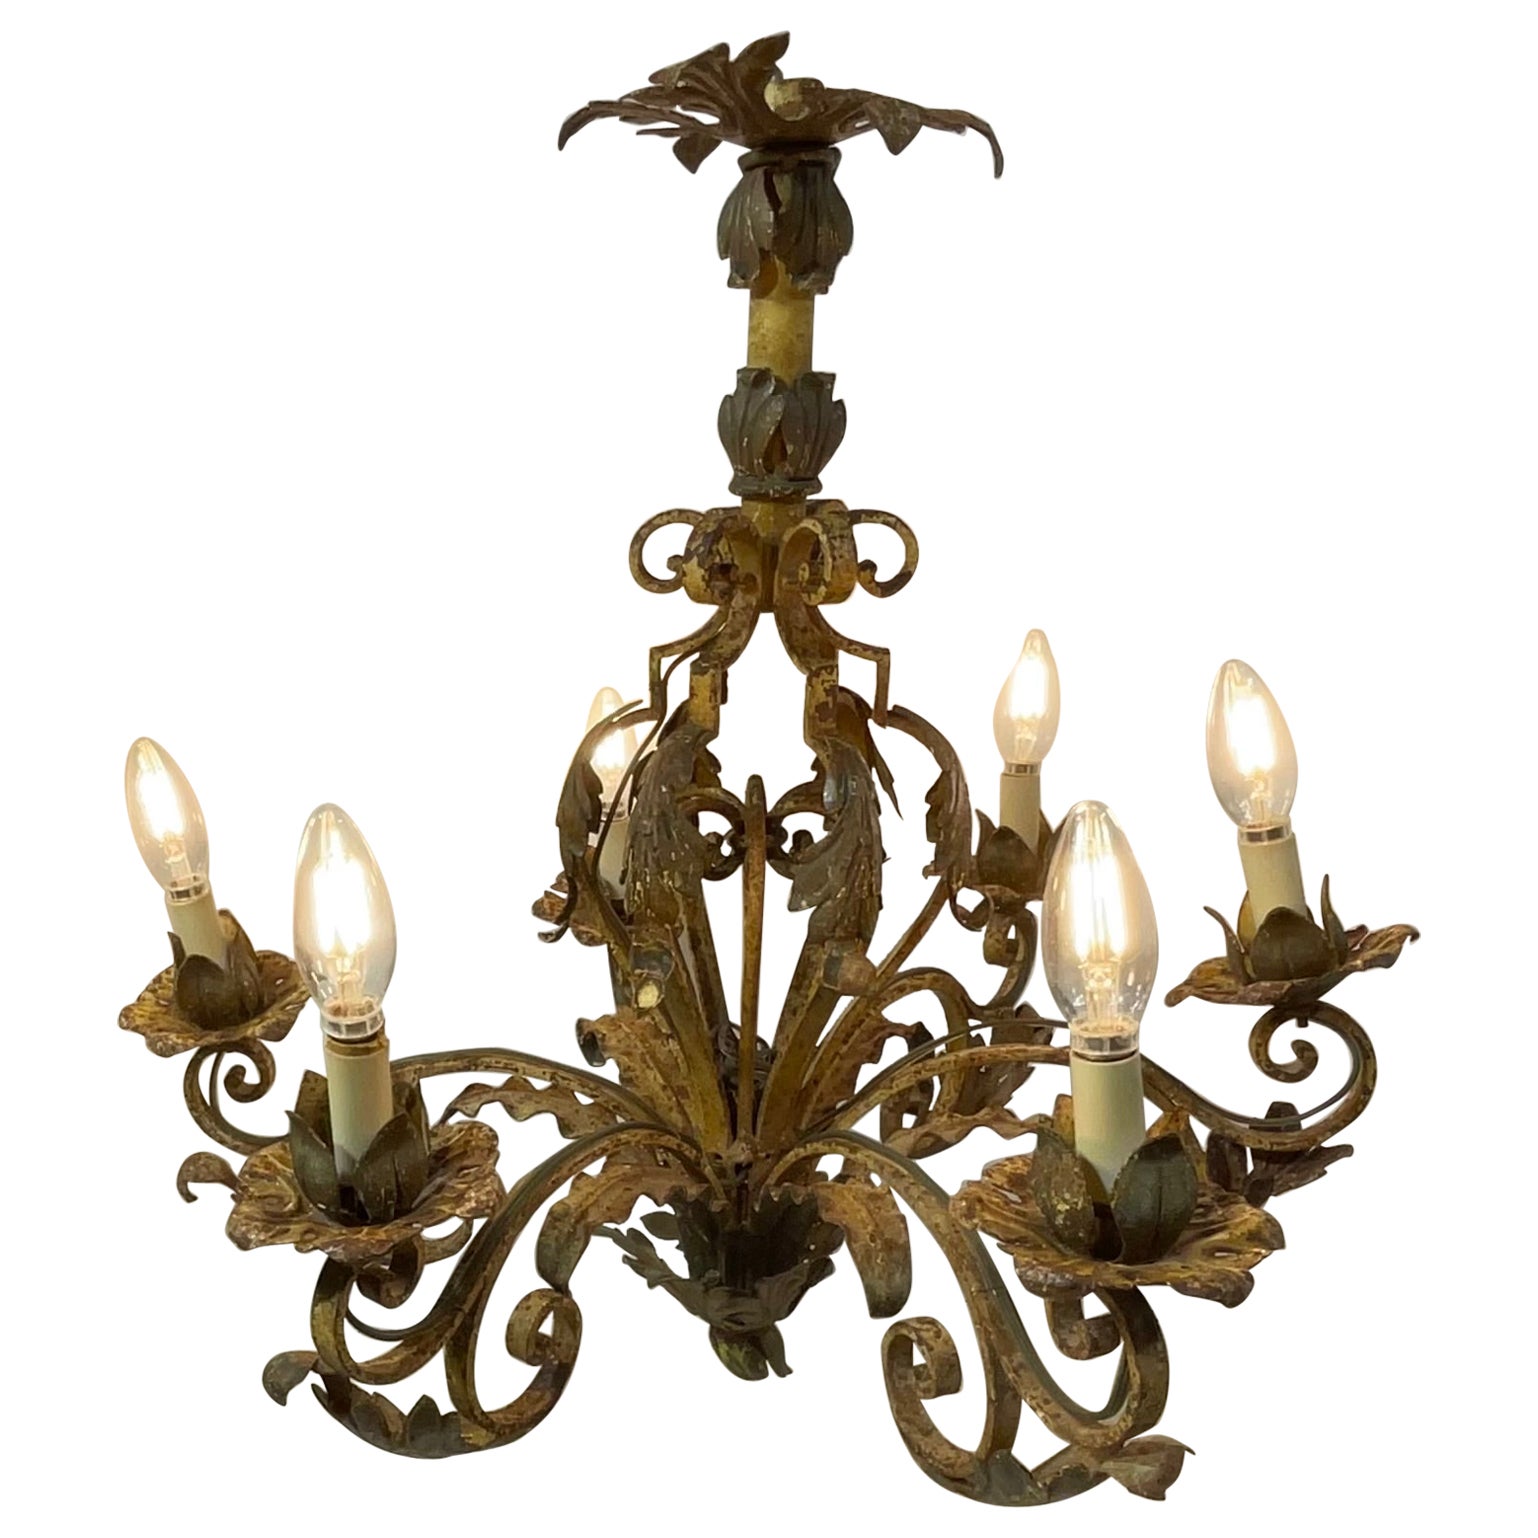 Ornate Wrought Iron Mizner Style Chandelier For Sale